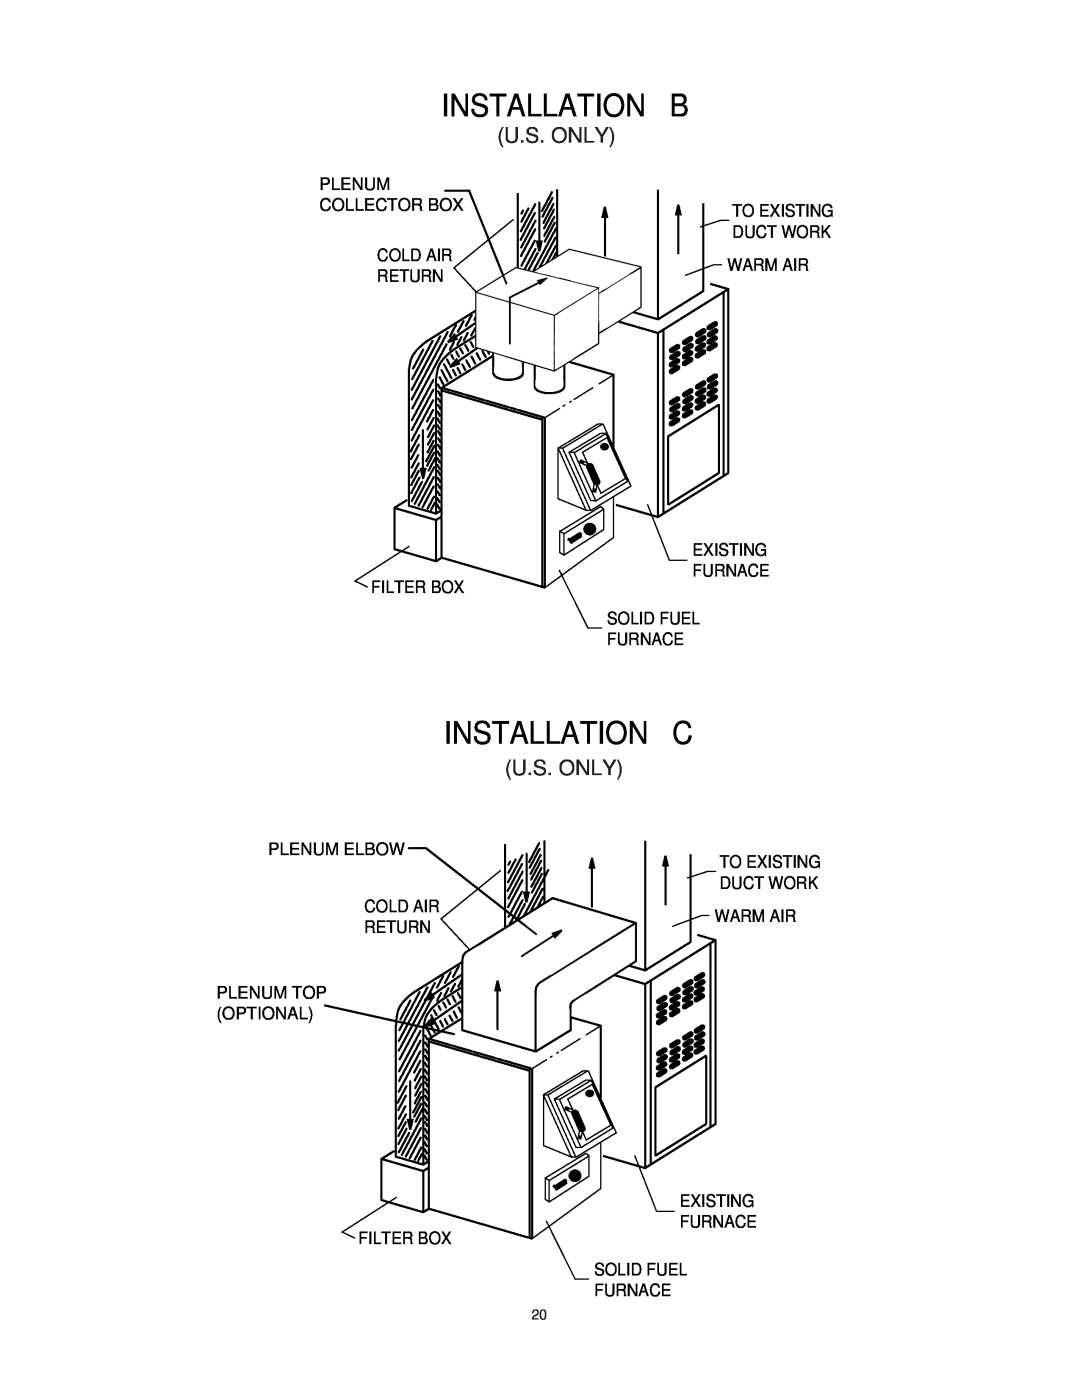 United States Stove 1537G owner manual Installation B, Installation C, Plenum Collector Box Cold Air Return Filter Box 